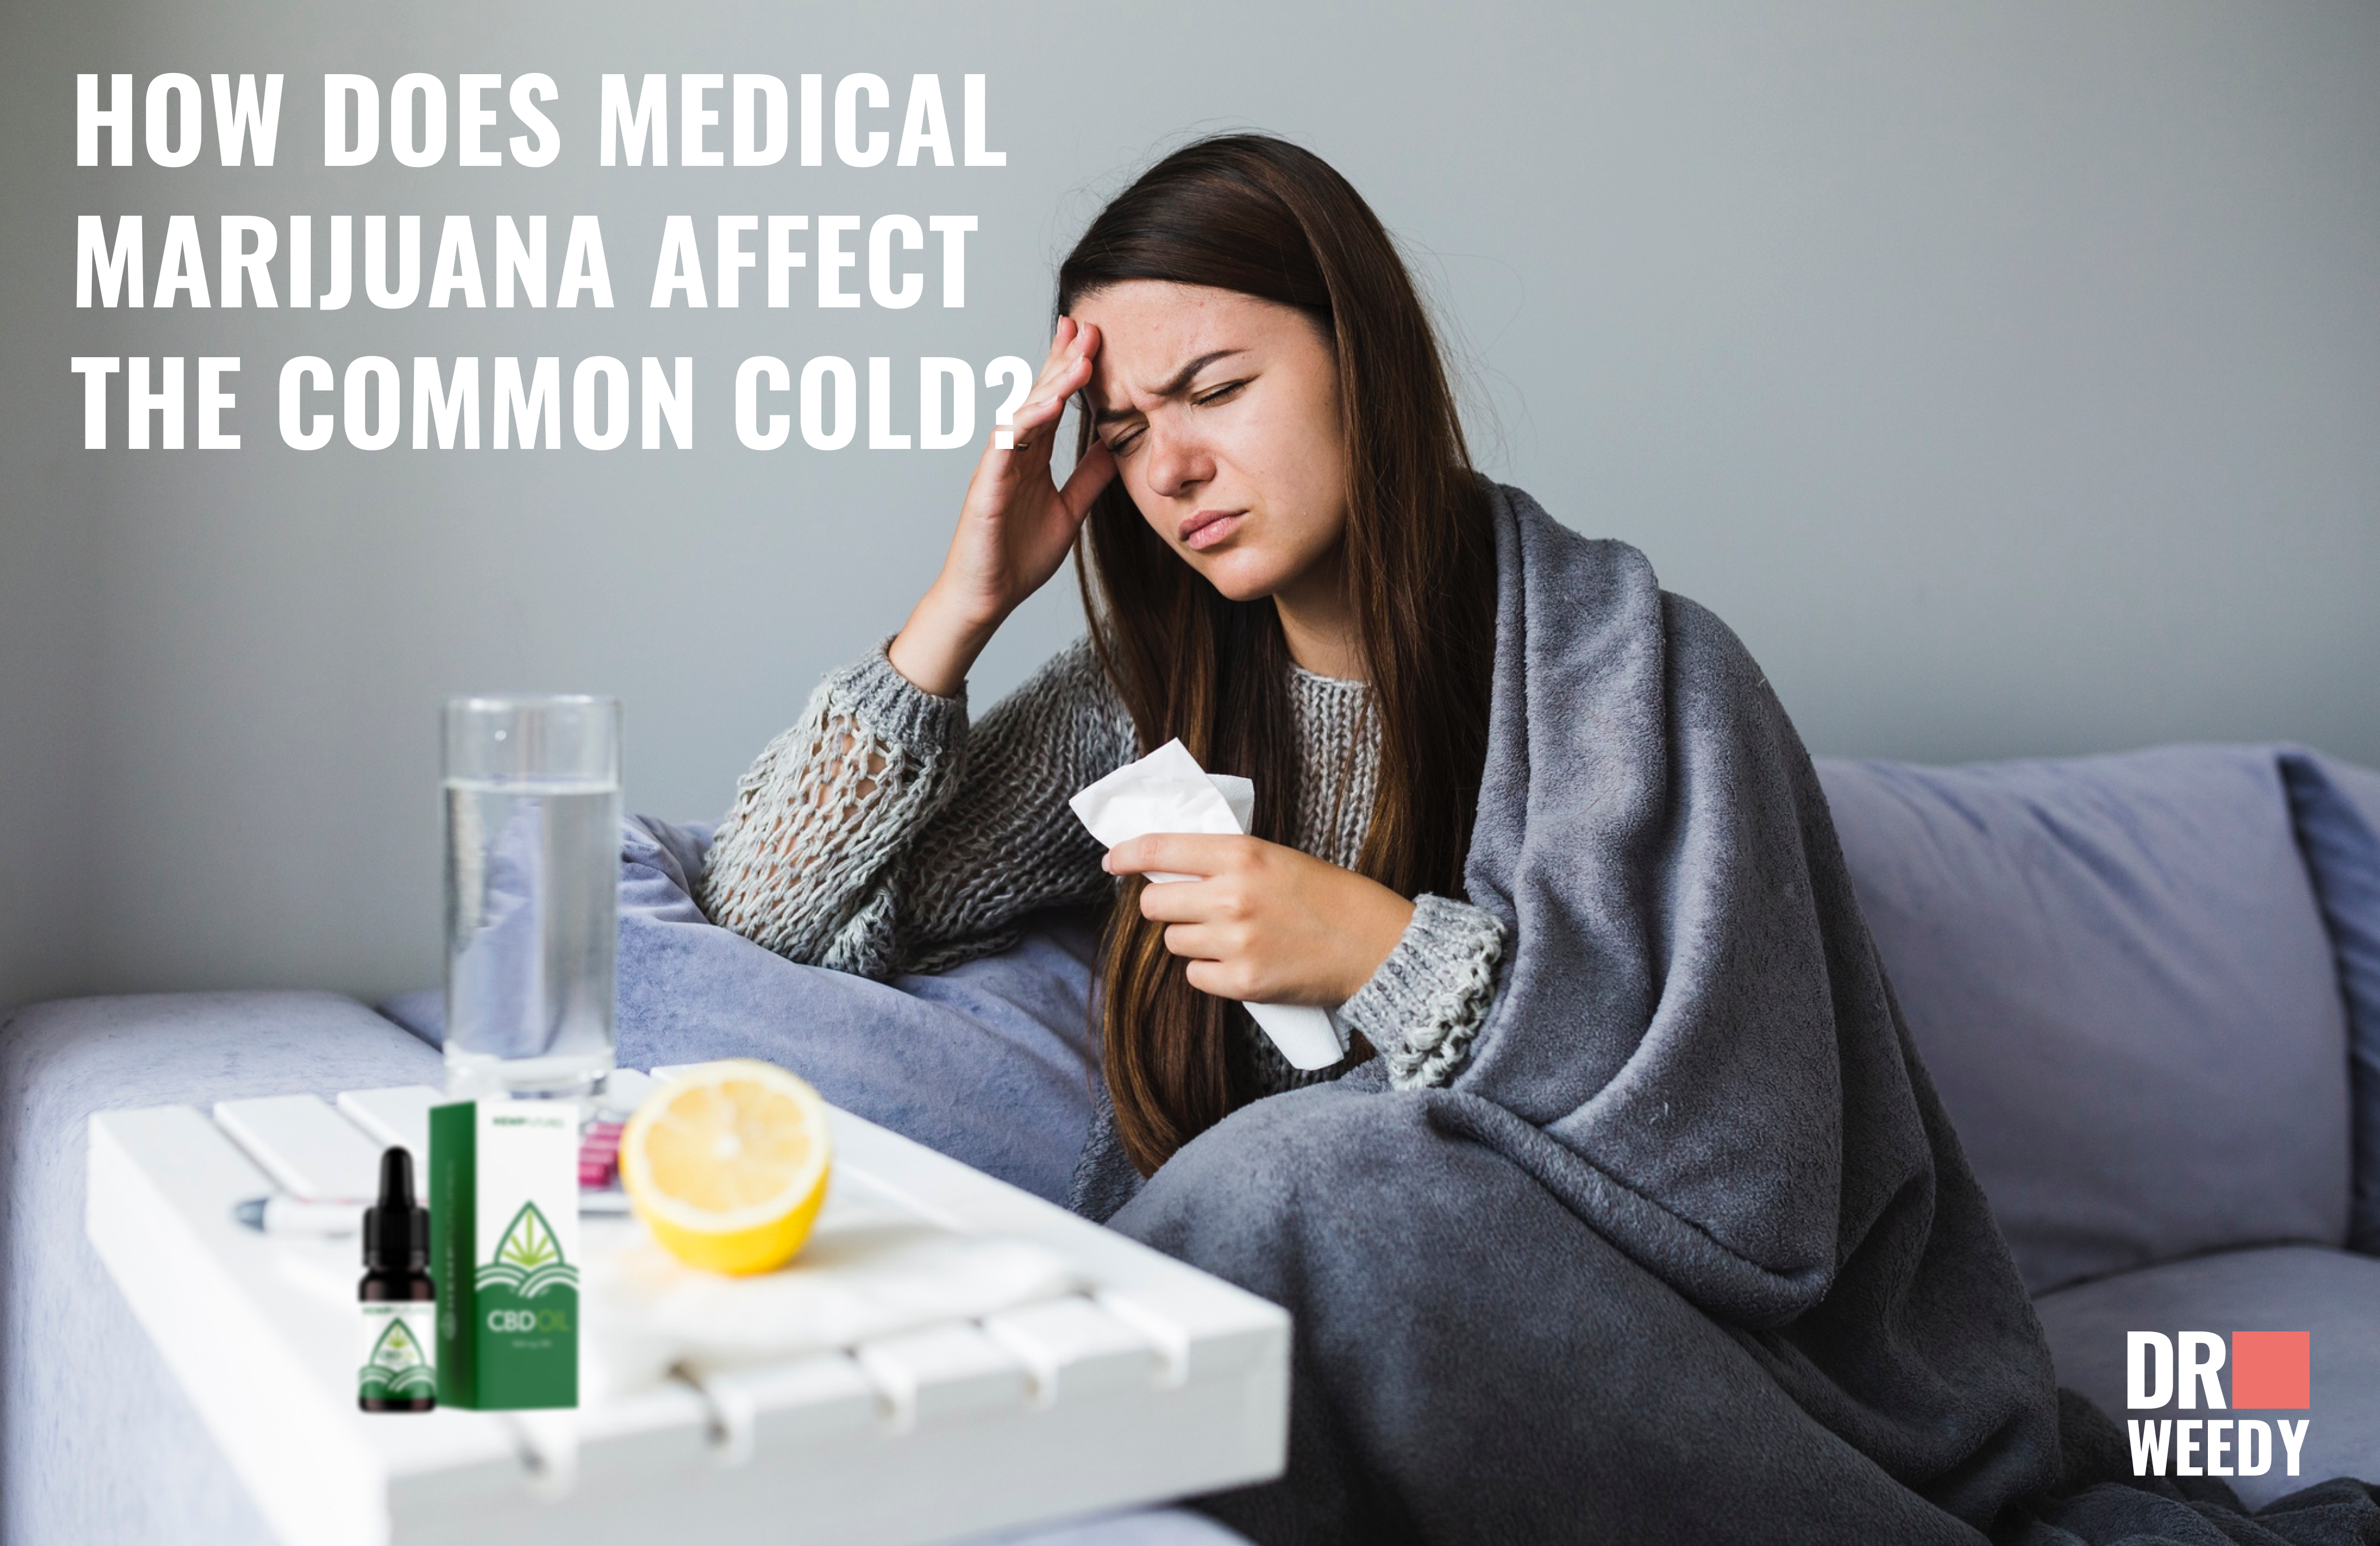 How Does Medical Marijuana Affect the Common Cold?